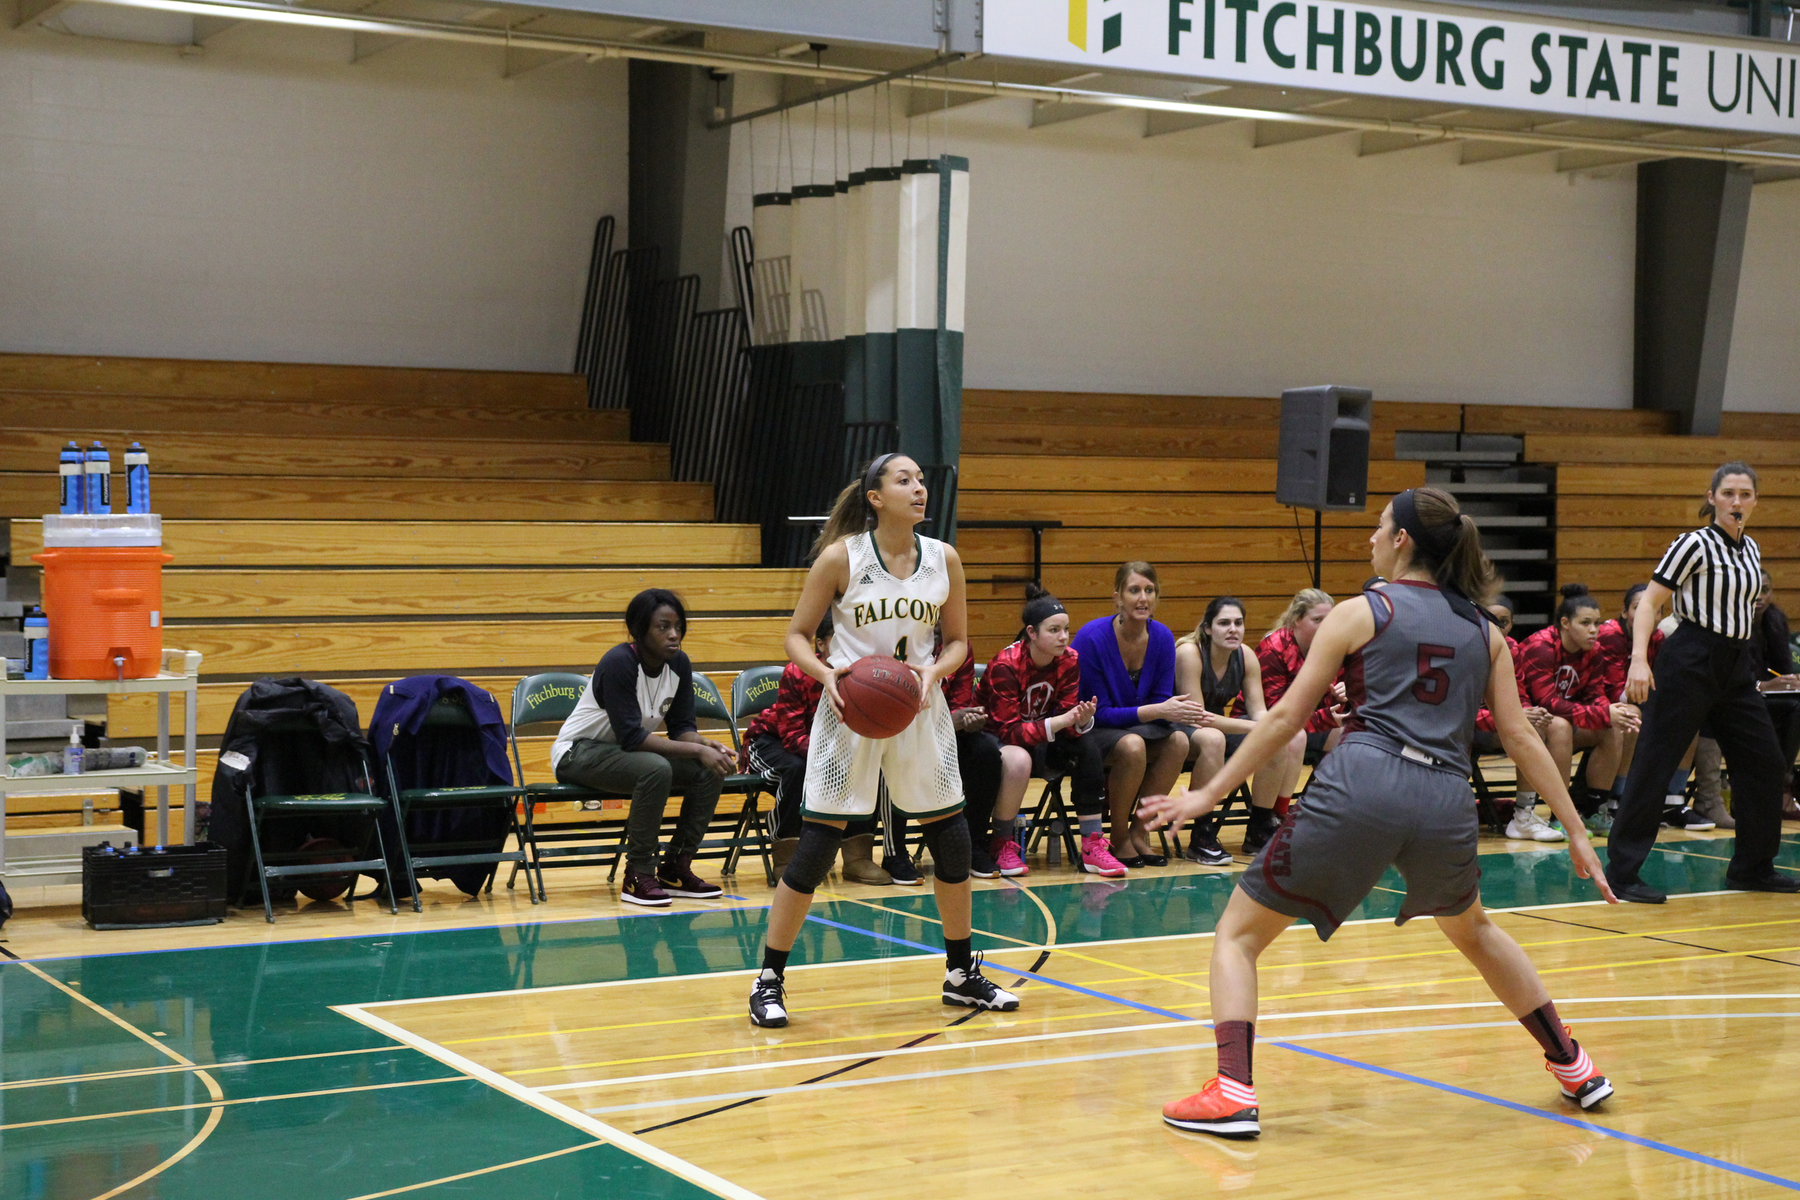 Fitchburg State Falls At Framingham State, 99-44